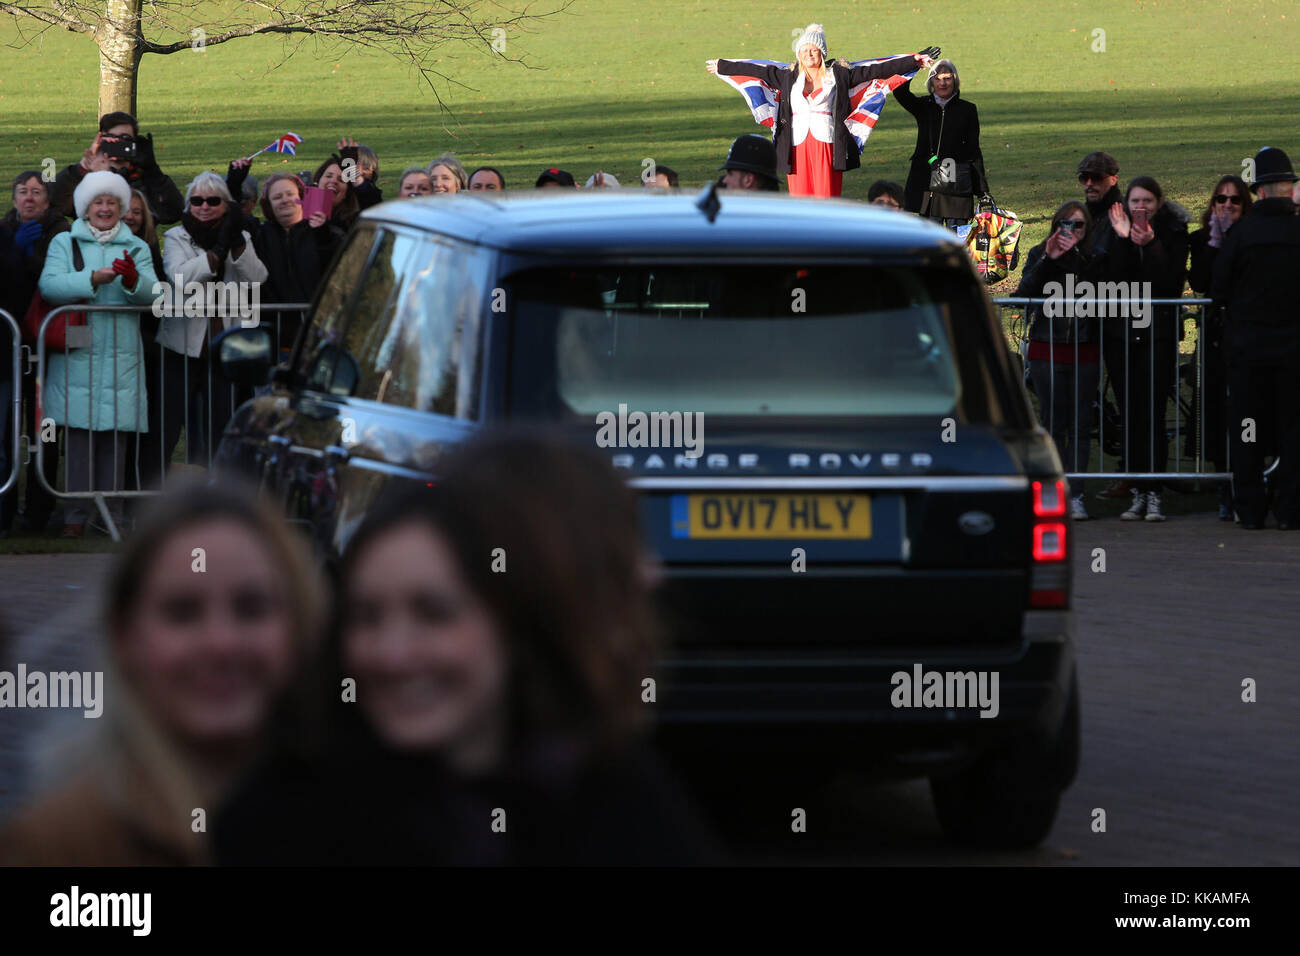 Chichester, West Sussex, UK. 30th November, 2017. Her Majesty The Queen's visit to the Chichester Festival Theatre in Chichester, West Sussex, UK.  Thursday 30th November 2017   Credit: Sam Stephenson/Alamy Live News Stock Photo